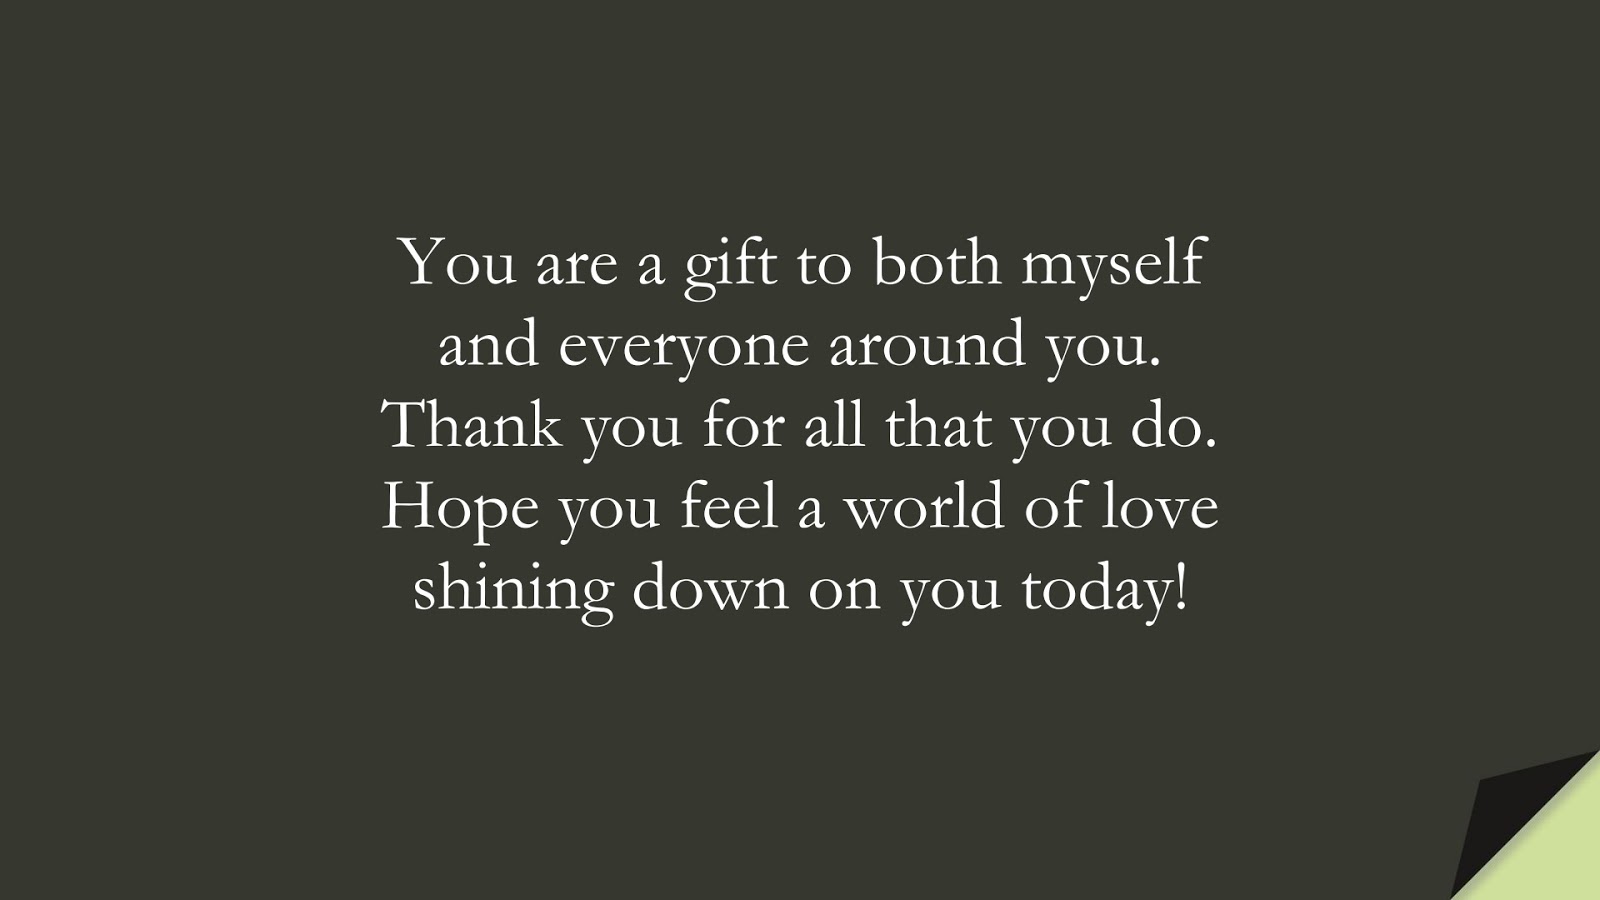 You are a gift to both myself and everyone around you. Thank you for all that you do. Hope you feel a world of love shining down on you today!FALSE